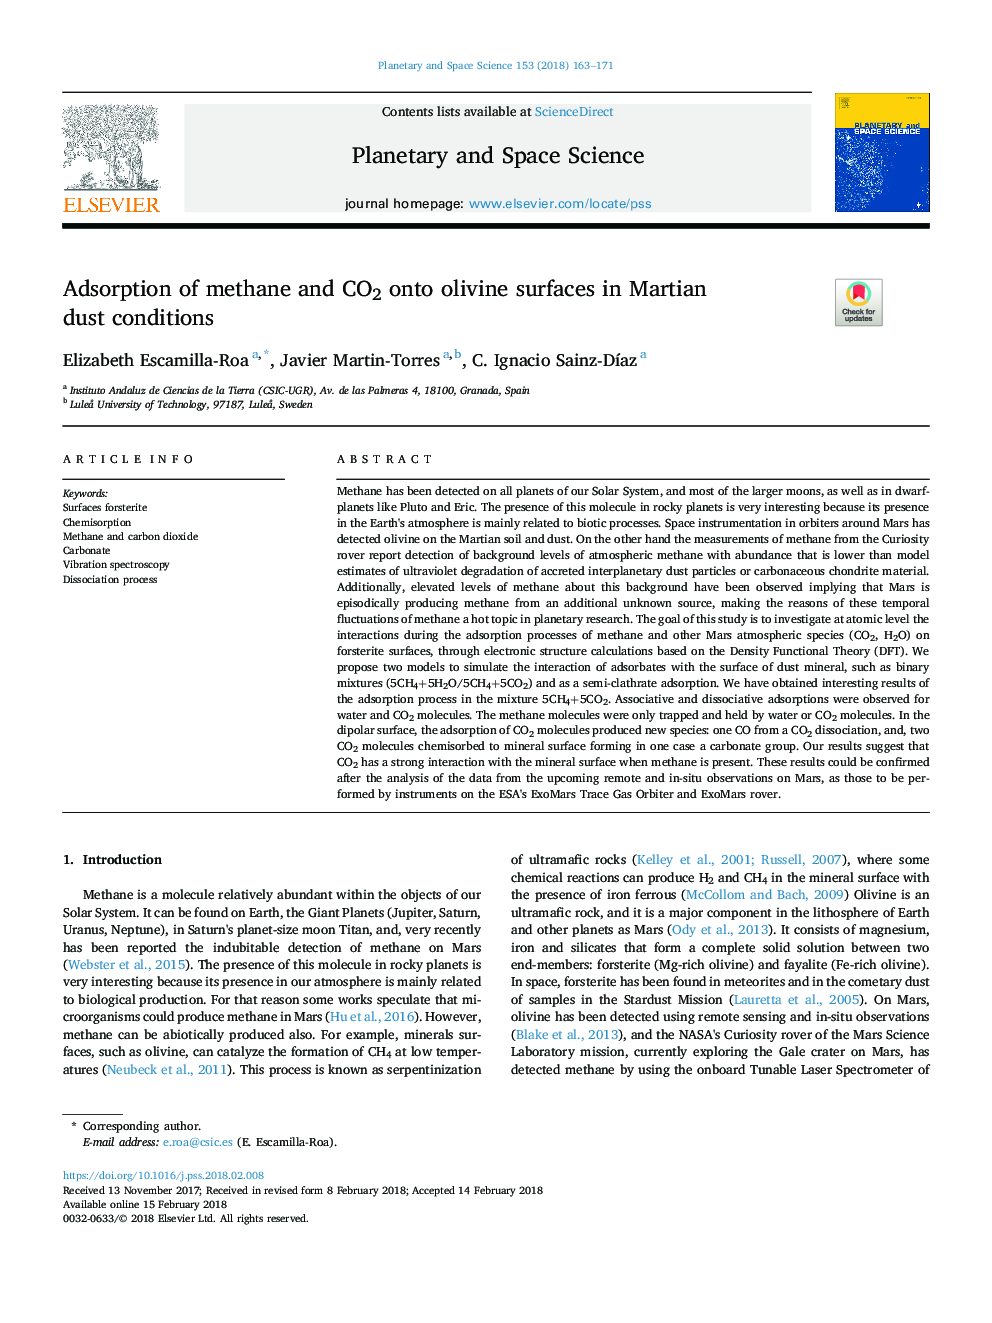 Adsorption of methane and CO2 onto olivine surfaces in Martian dust conditions